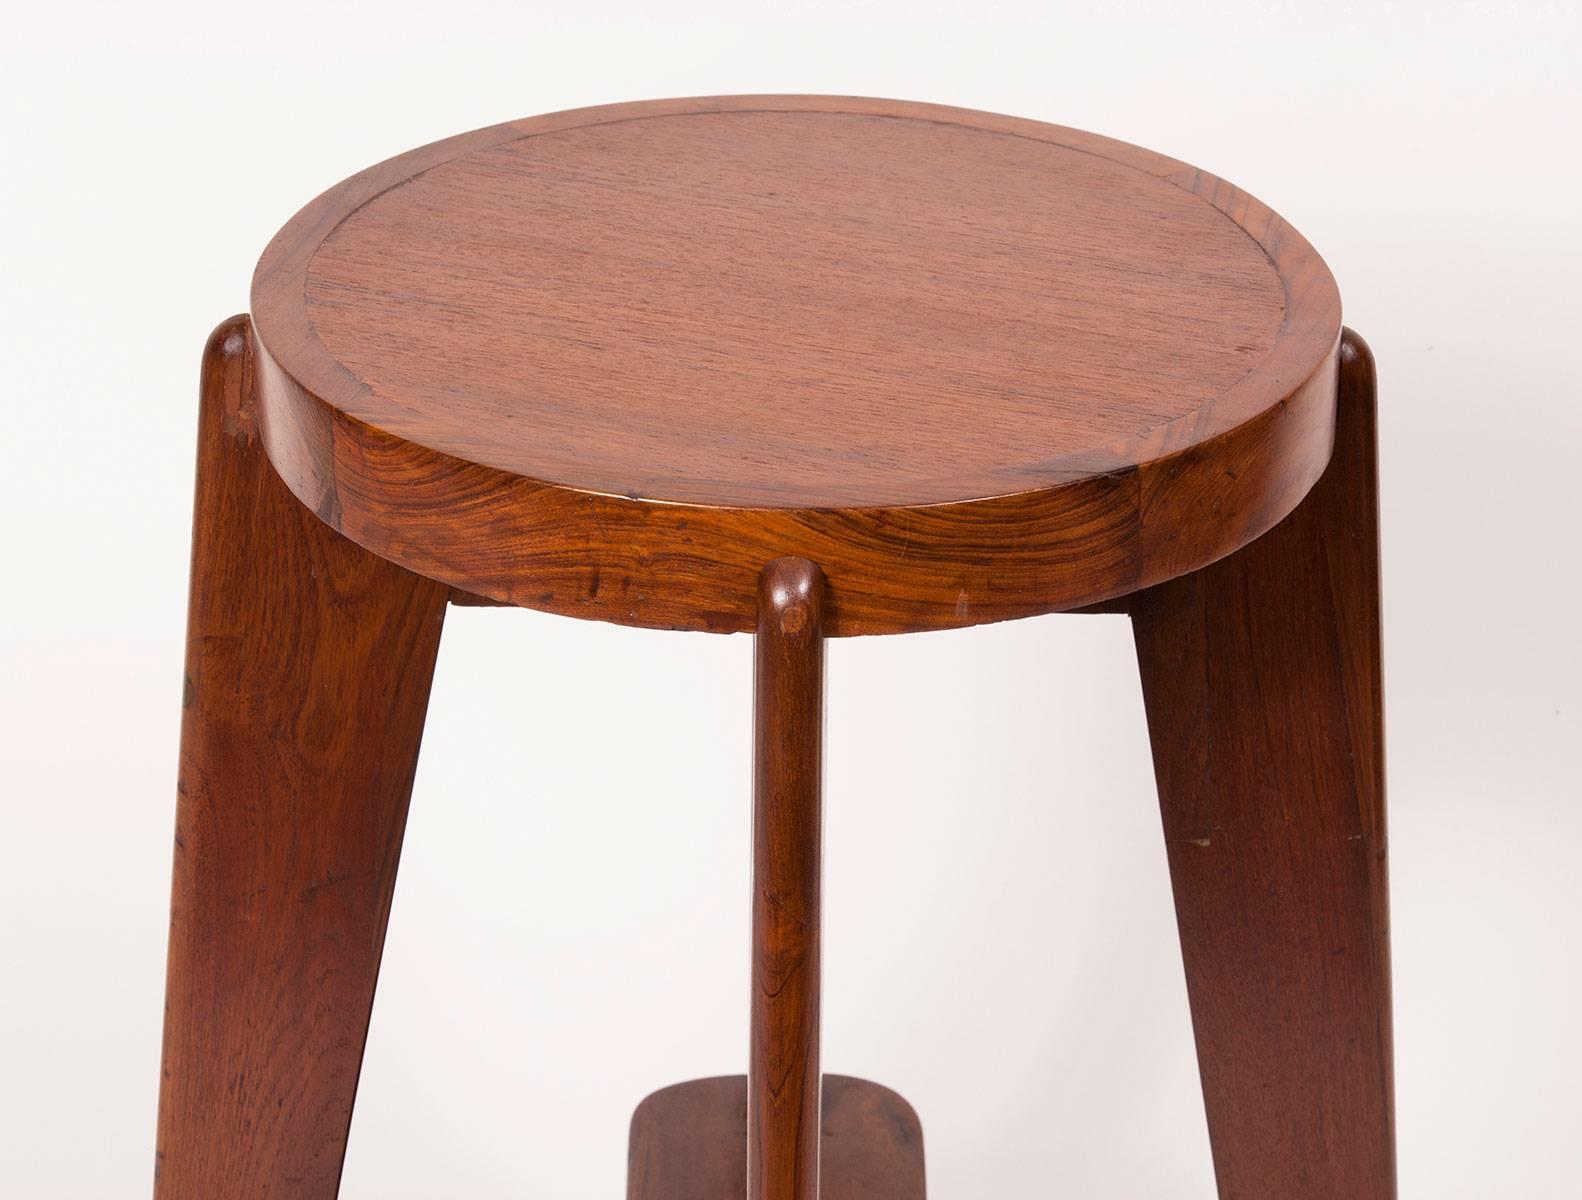 Modern Teak High Stool by Pierre Jeanneret for the City of Chandigarh